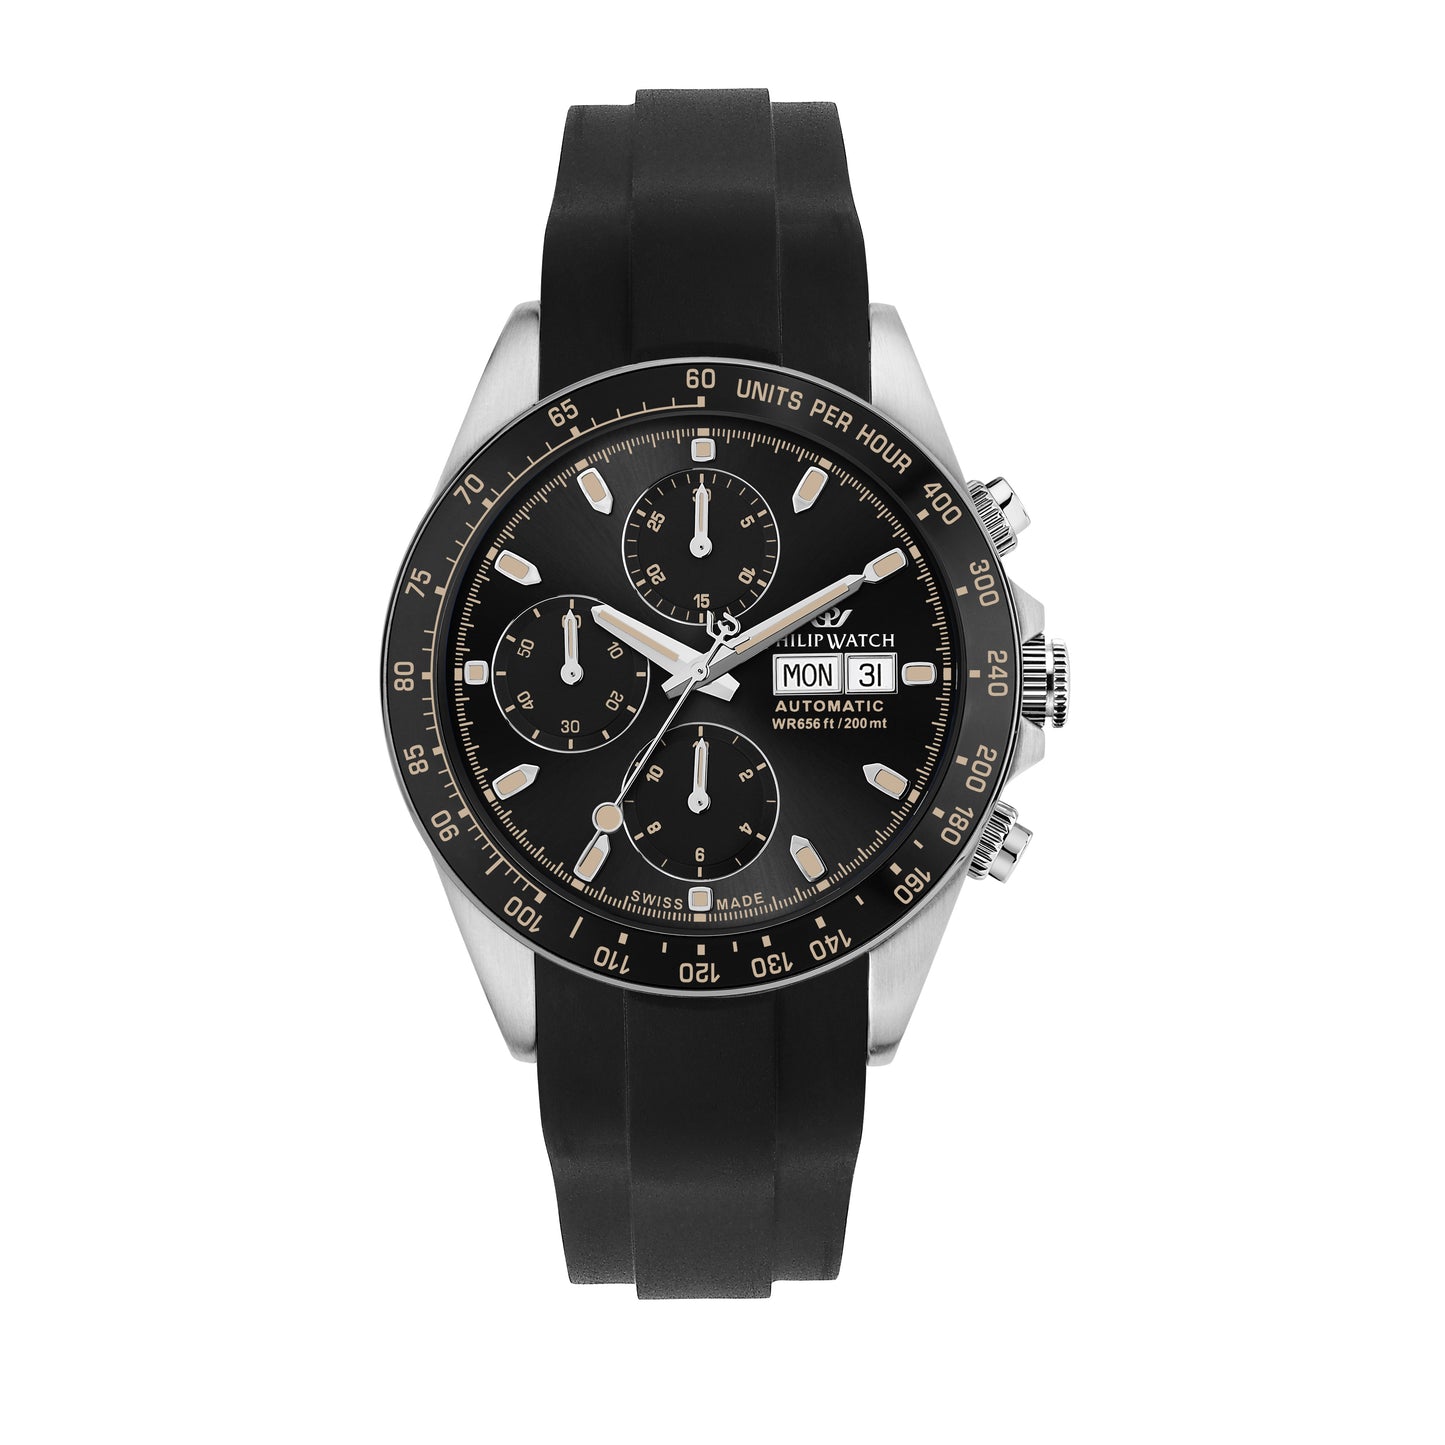 MONTRE HOMME PHILIP WATCH CARIBE DIVING R8243607006